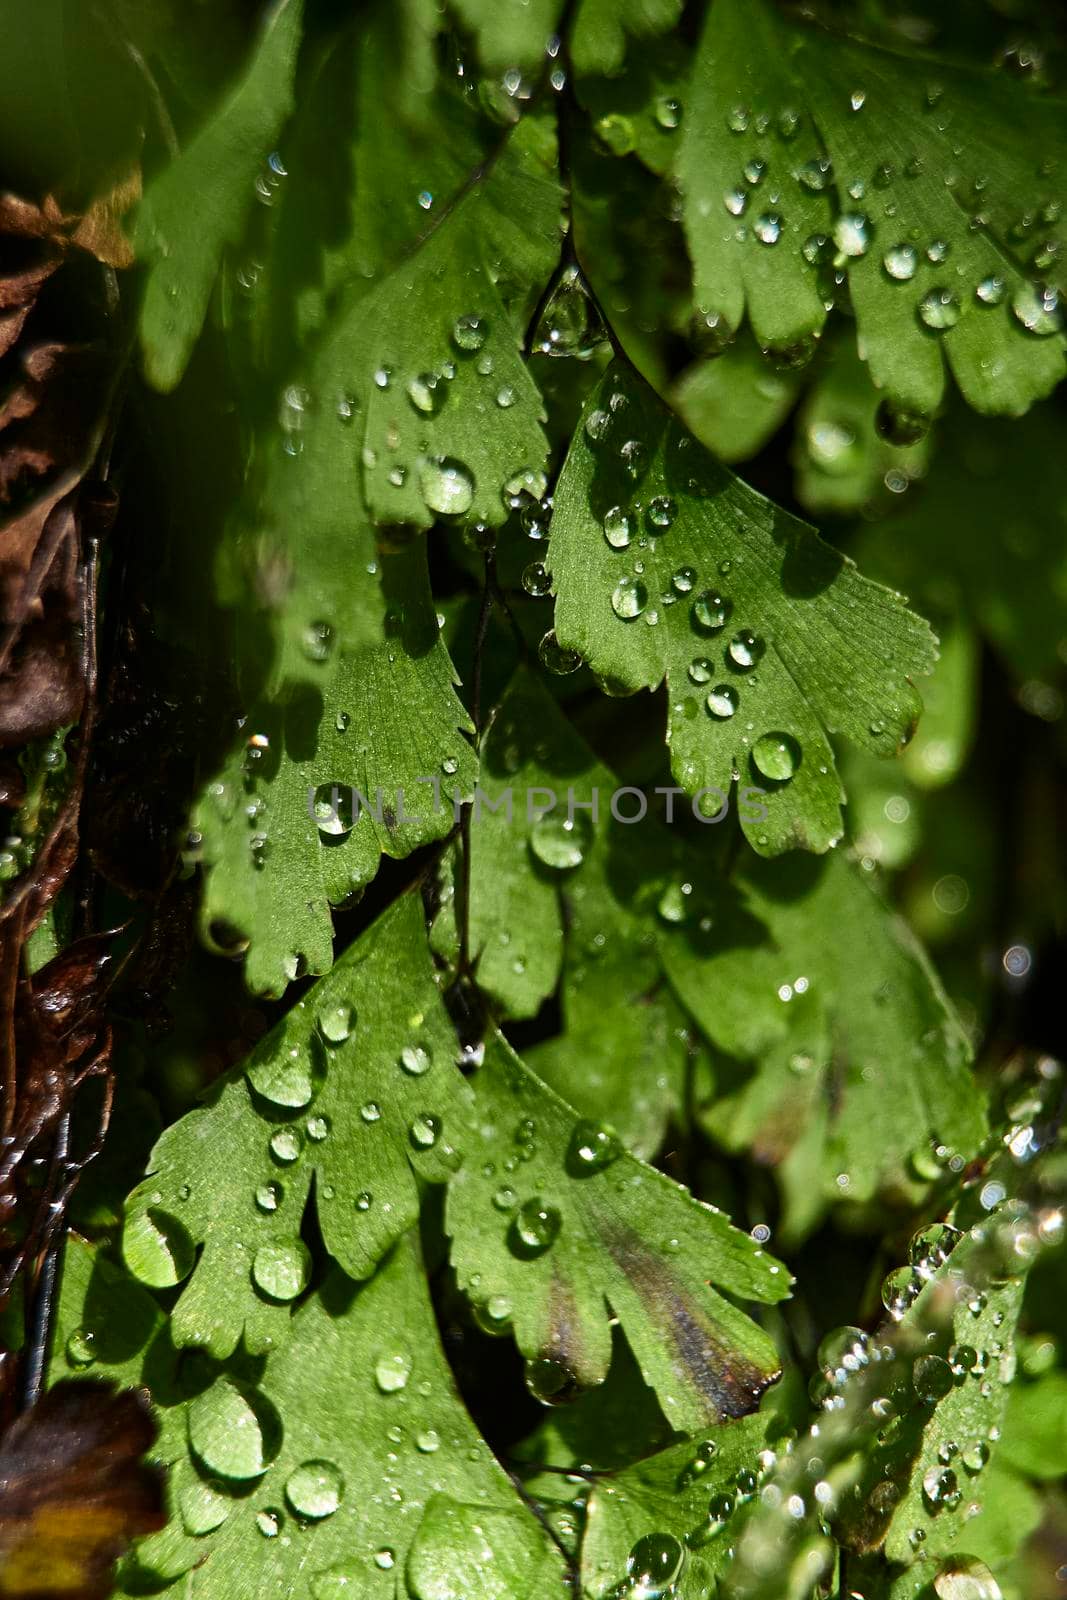 Fern leaves with small drops of water by raul_ruiz